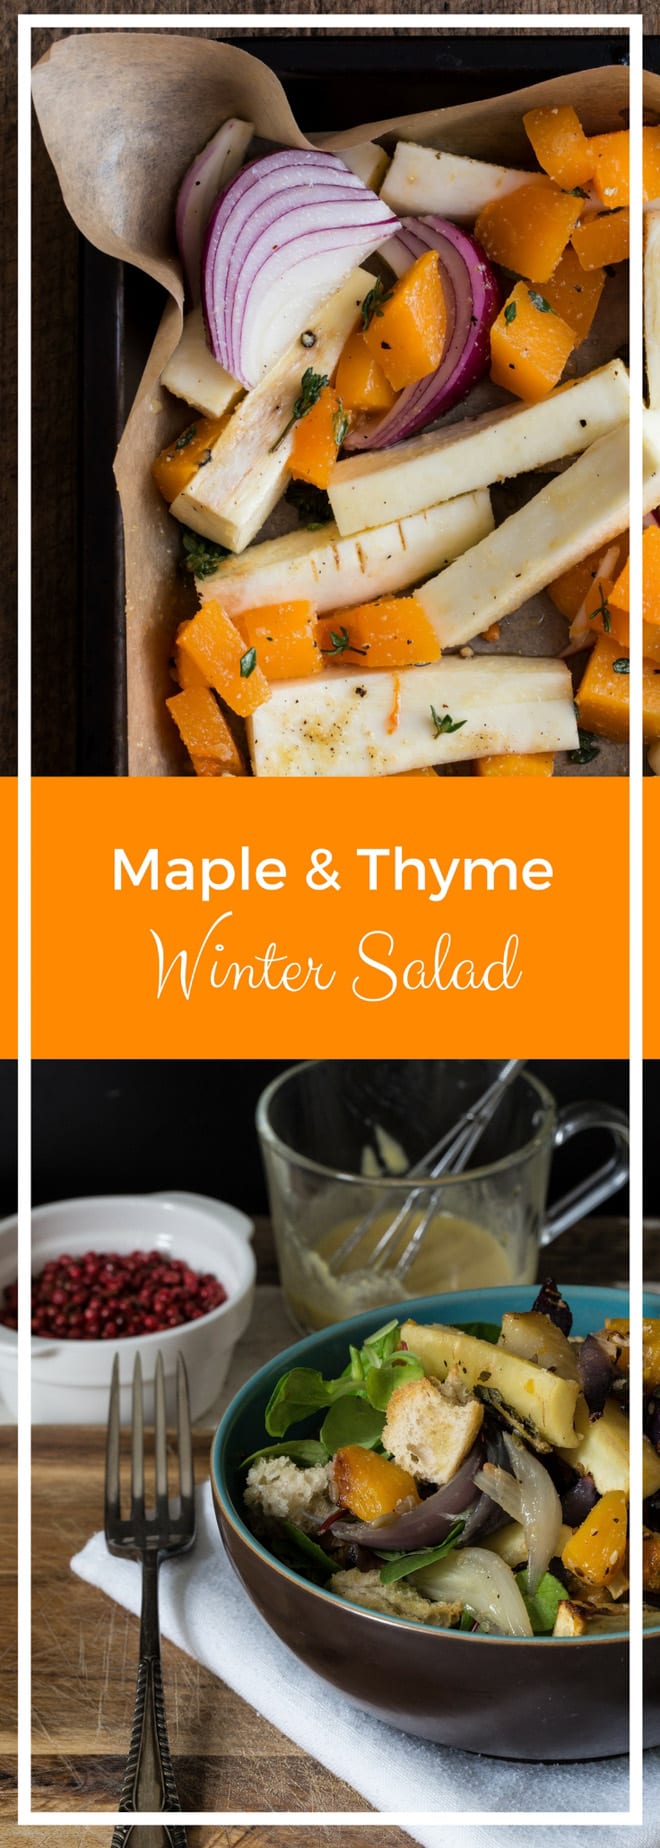 Maple and Thyme Winter Veggie Salad - liven up a dull day with this seasonal and colourful salad - warm herby veg mixed with peppery leaves wrapped up in a tangy dressing | thecookandhim.com